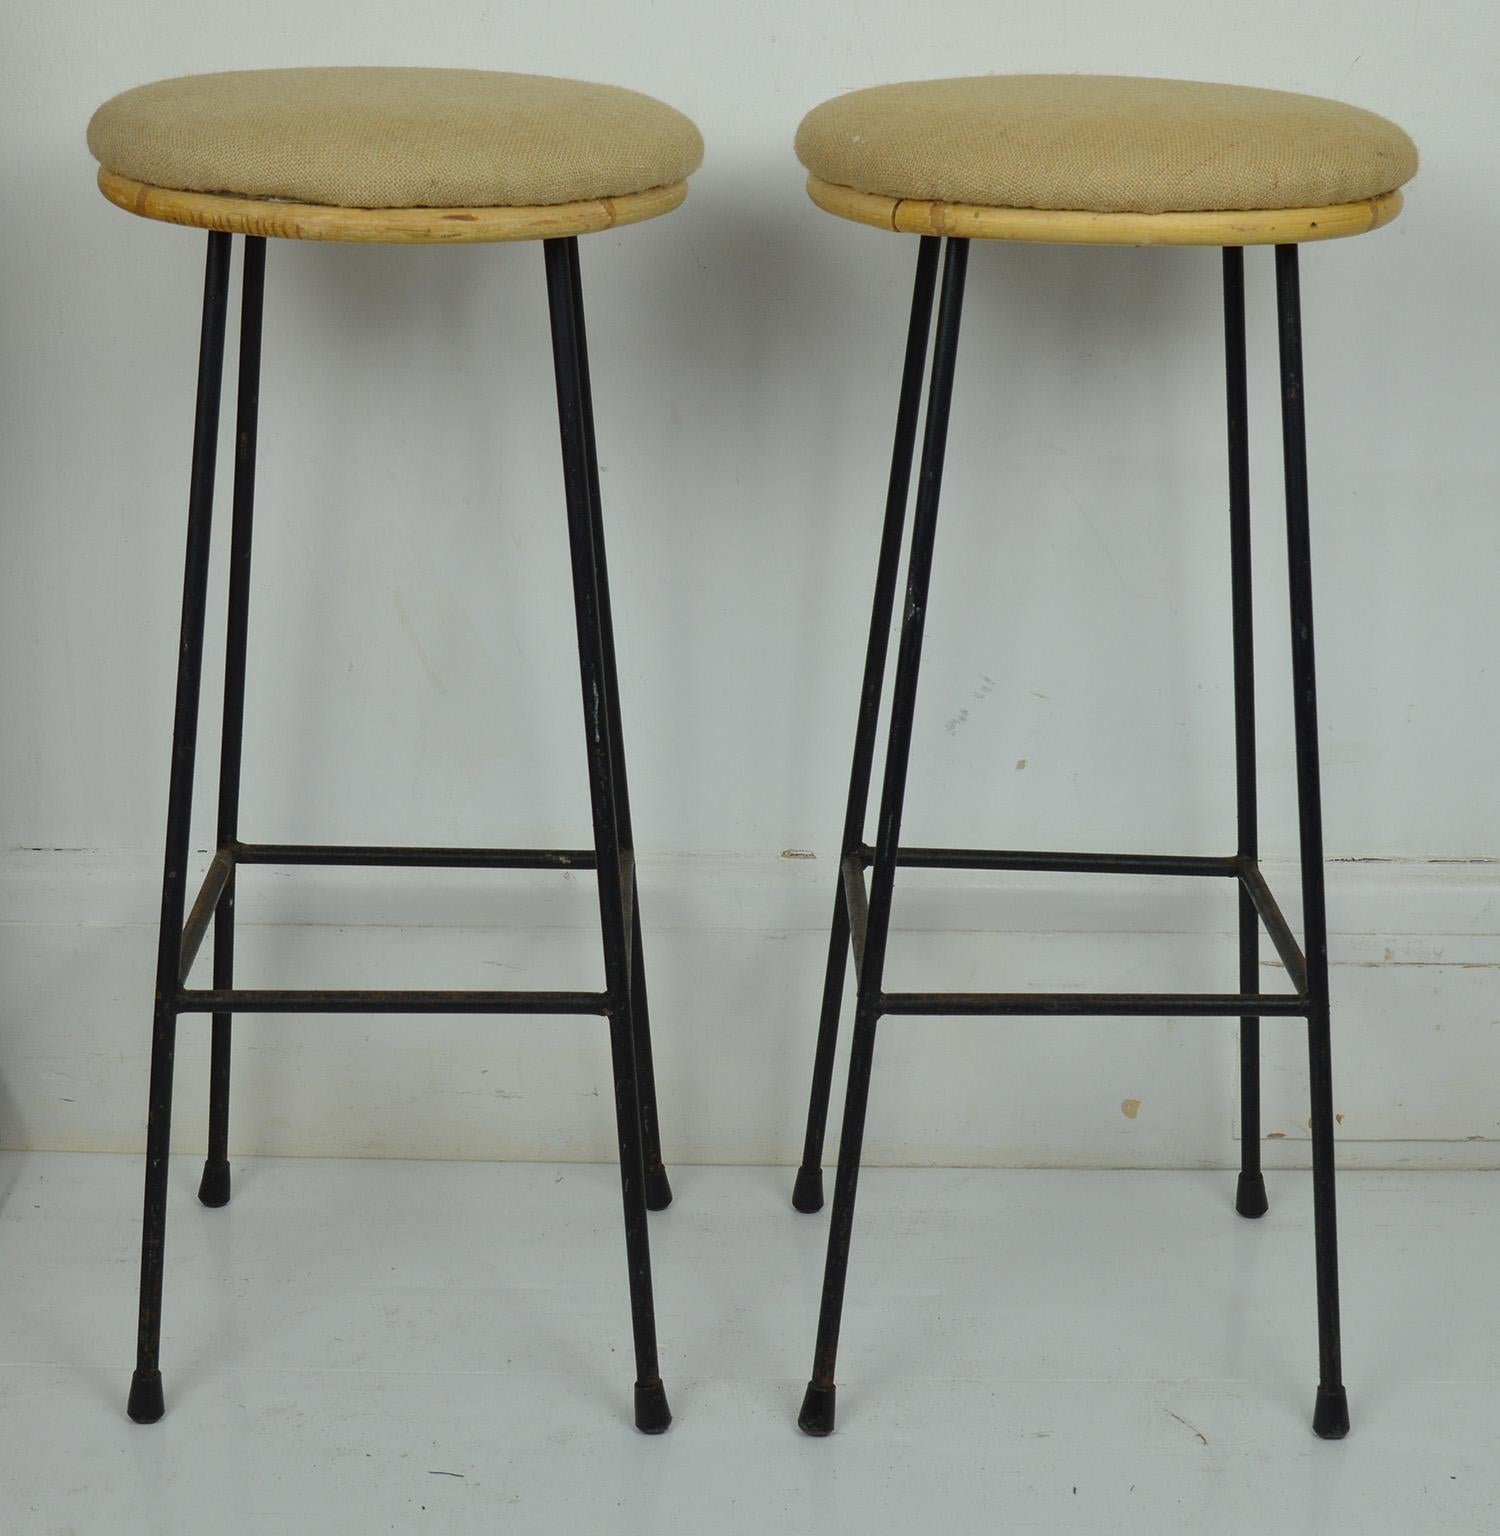 Wonderfully simple pair of wrought iron framed bar stools.

Designer unknown. Probably Italian.

Bamboo seats re-upholstered in burlap 

The original black painted metal parts showing signs of rust in places.
  